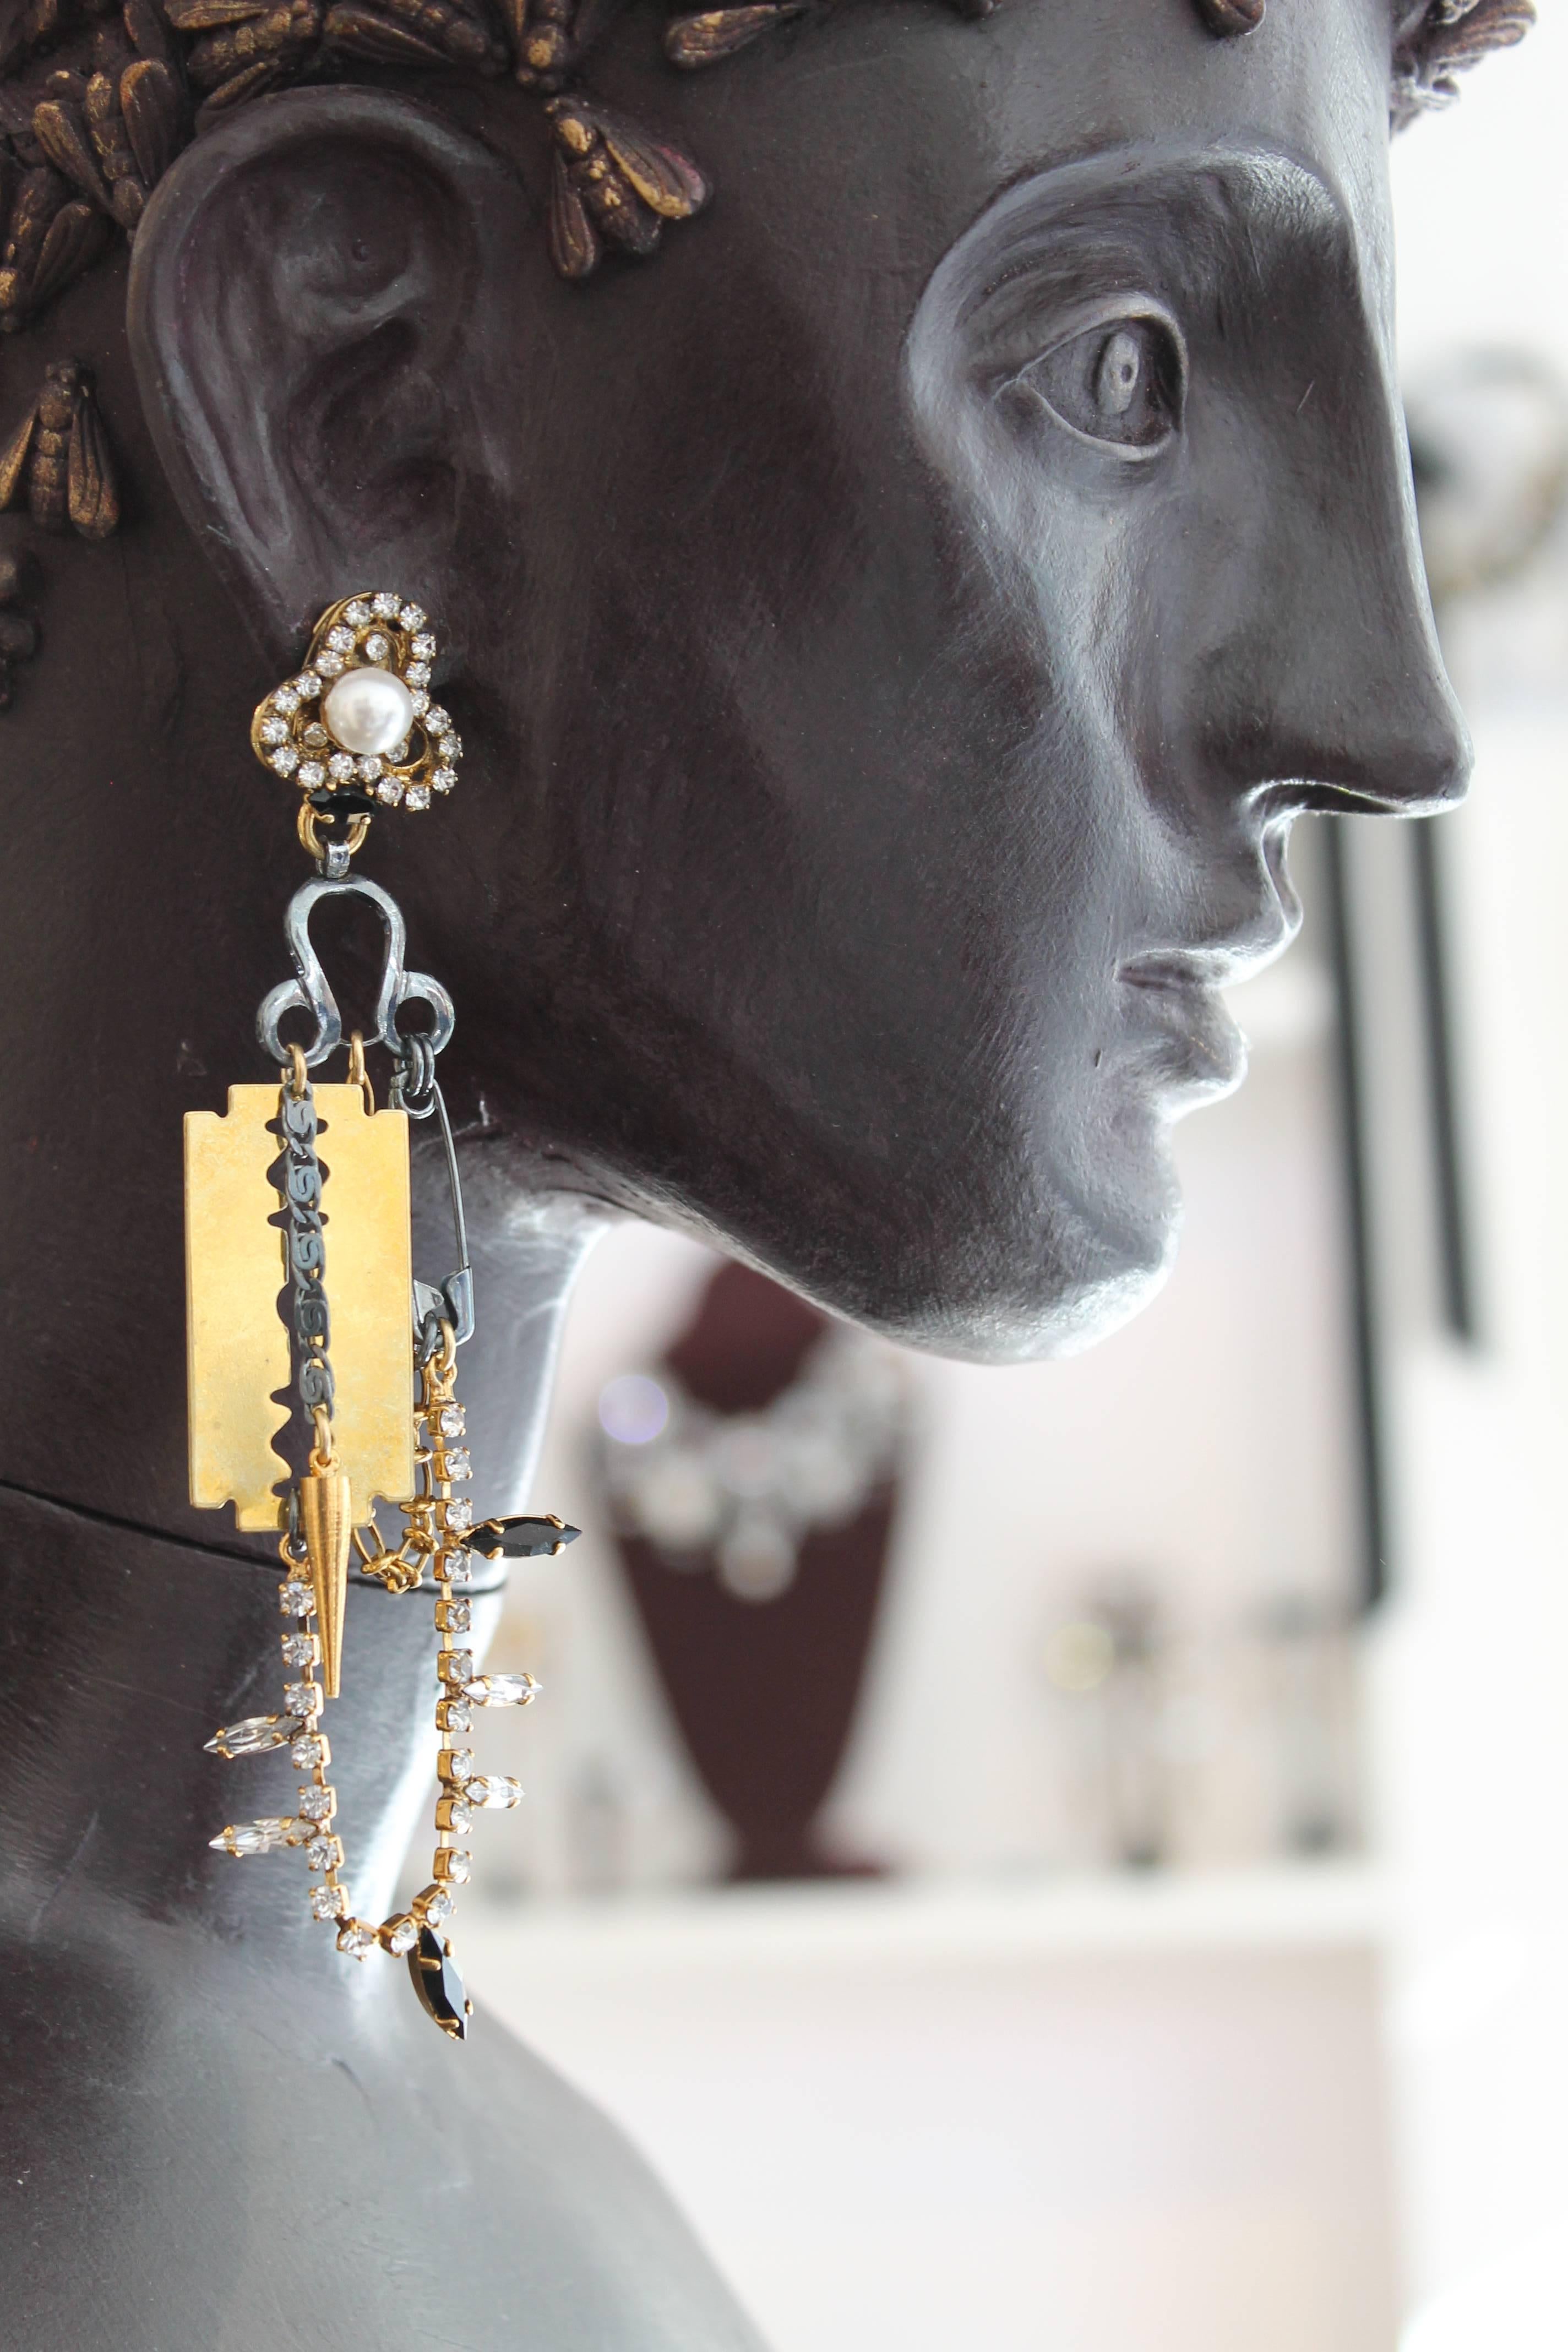 With 23ct gold plated razorblades (blunt) and safety pins, spikes, Swarovski crystal and faux pearl accents - these earrings are made for those who enjoy making a glamorous and original statement. 

VICKISARGE's Punk story encapsulates both the